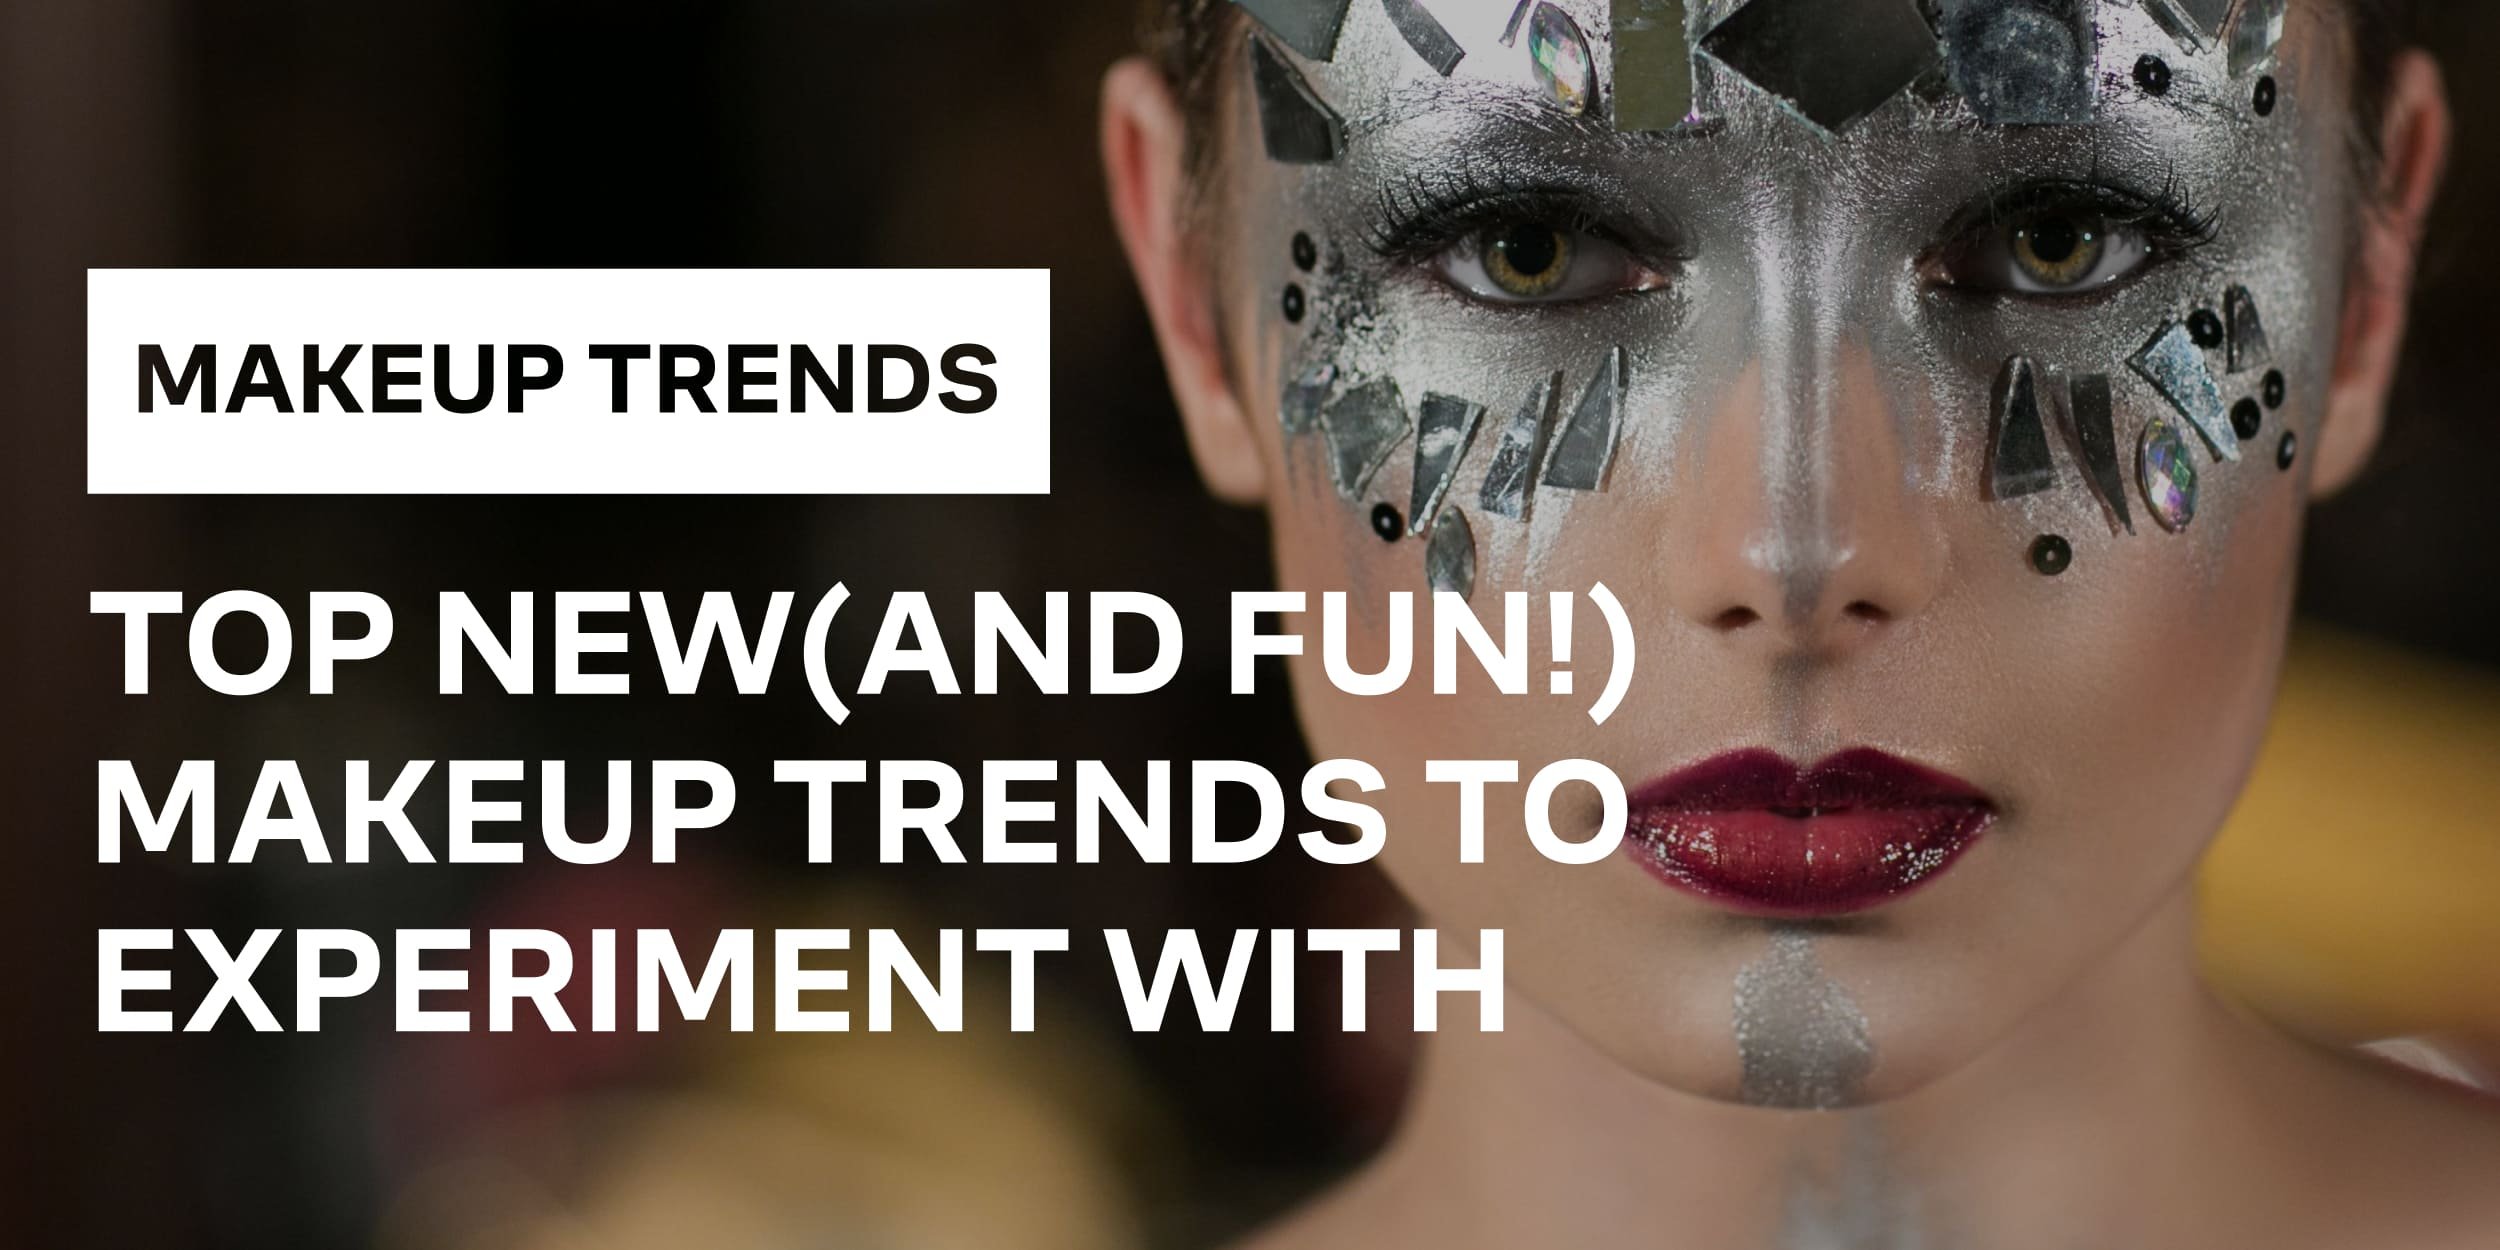 Top New (and Fun!) Makeup Trends To Experiment With